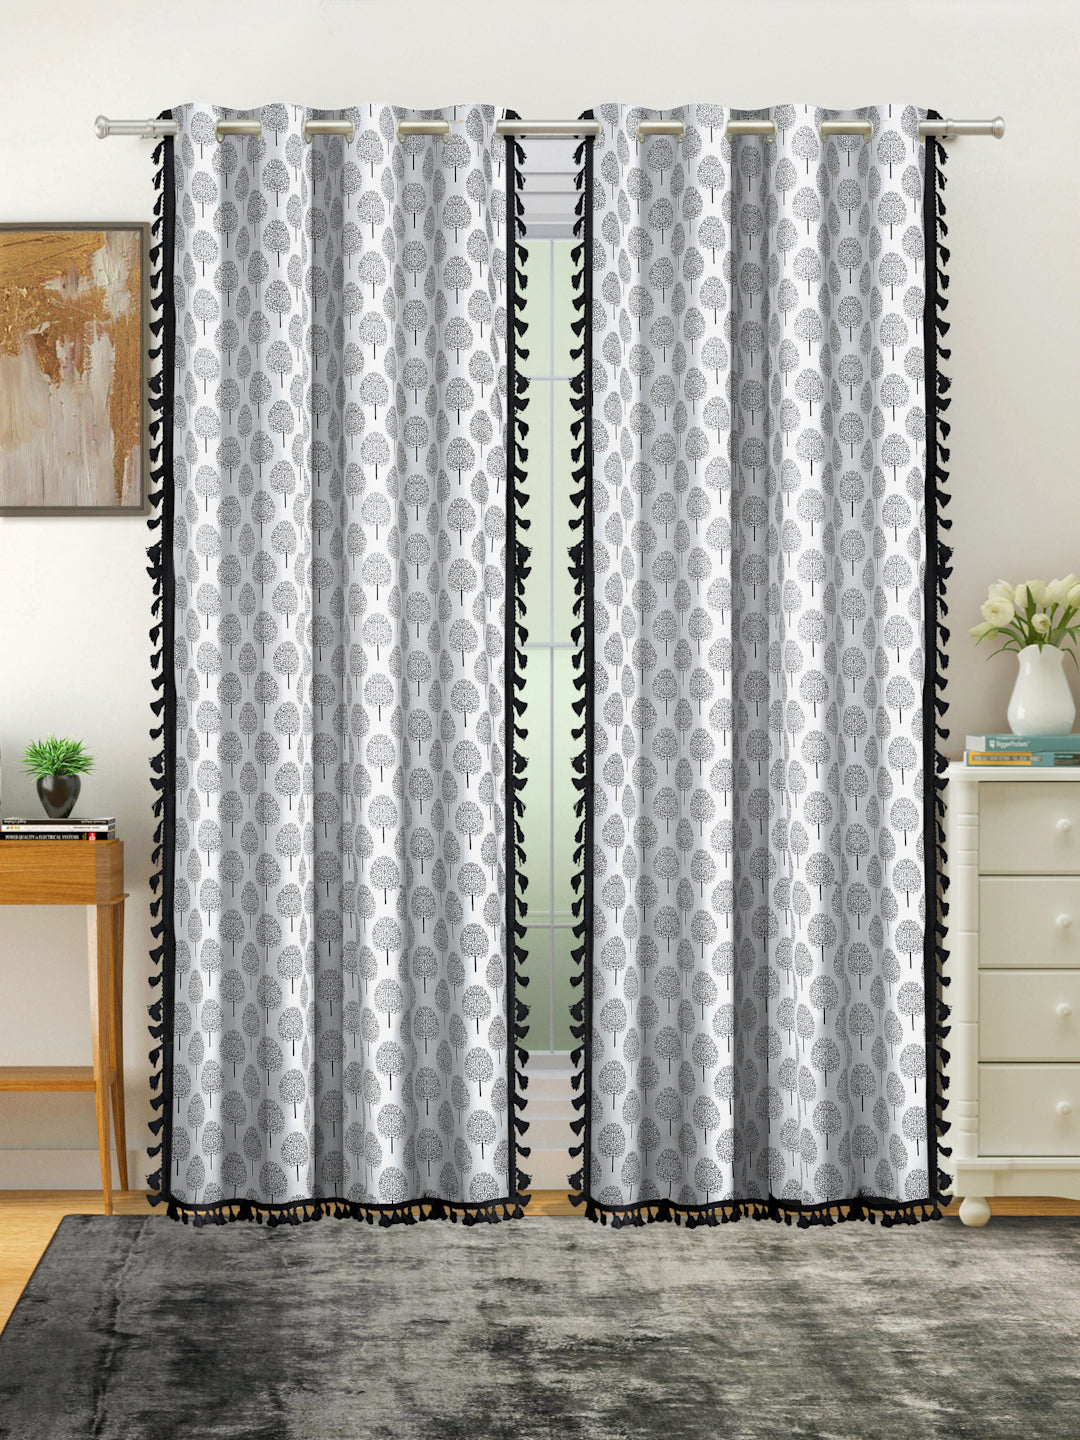 Cotton Printed Boho Light Filtering Long Door Curtain with Lace- Black and White (Pack of 1)